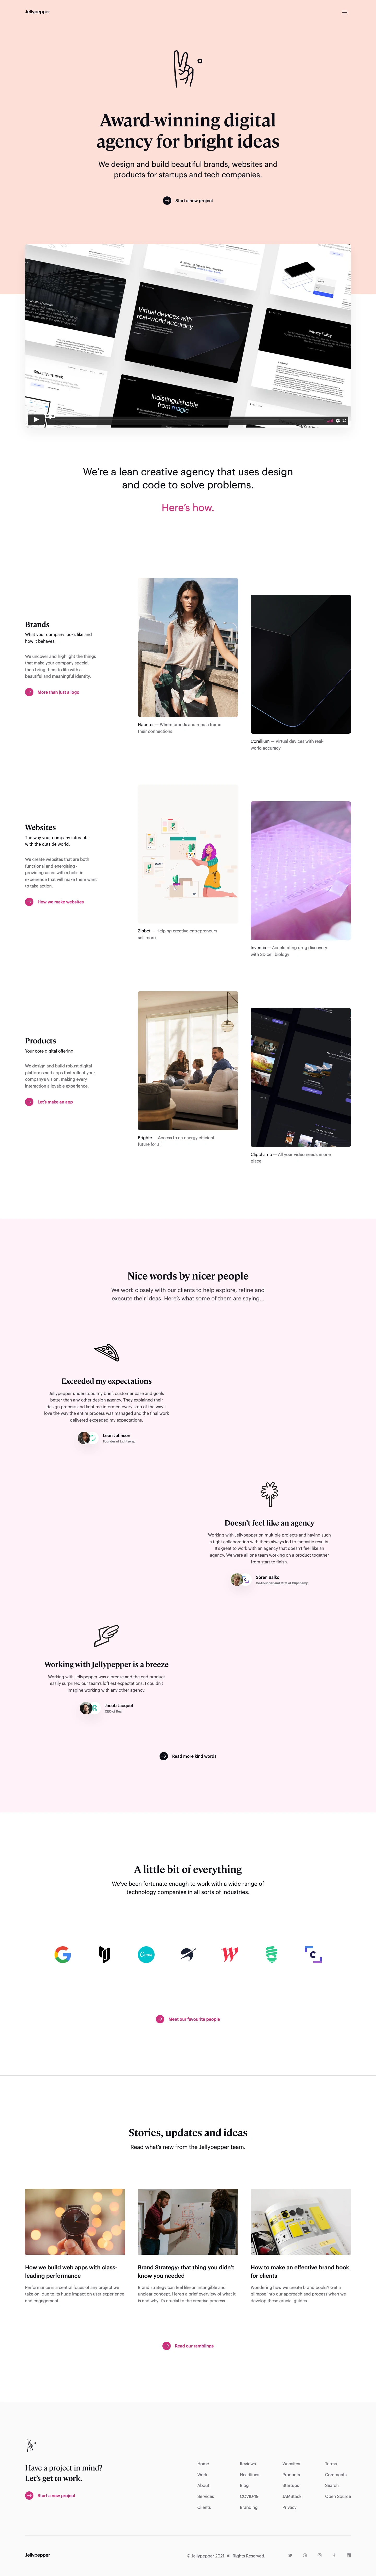 Jellypepper Landing Page Example: Award-winning digital agency for bright ideas. We design and build beautiful brands, websites and products for startups and tech companies.